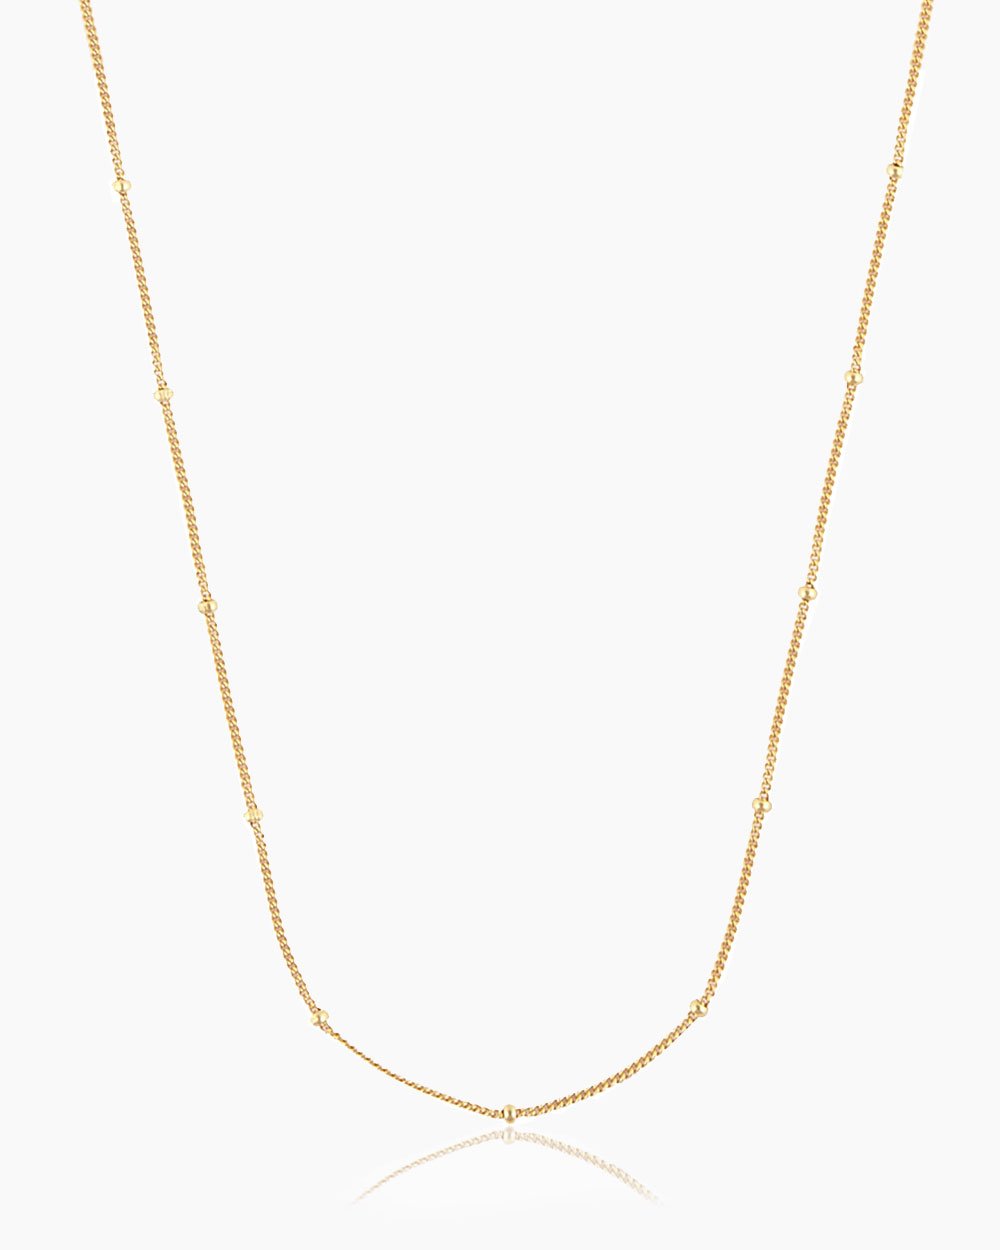 The Louisa Necklace, a classic gold beaded chain that offers an ultra-stackable minimalist style